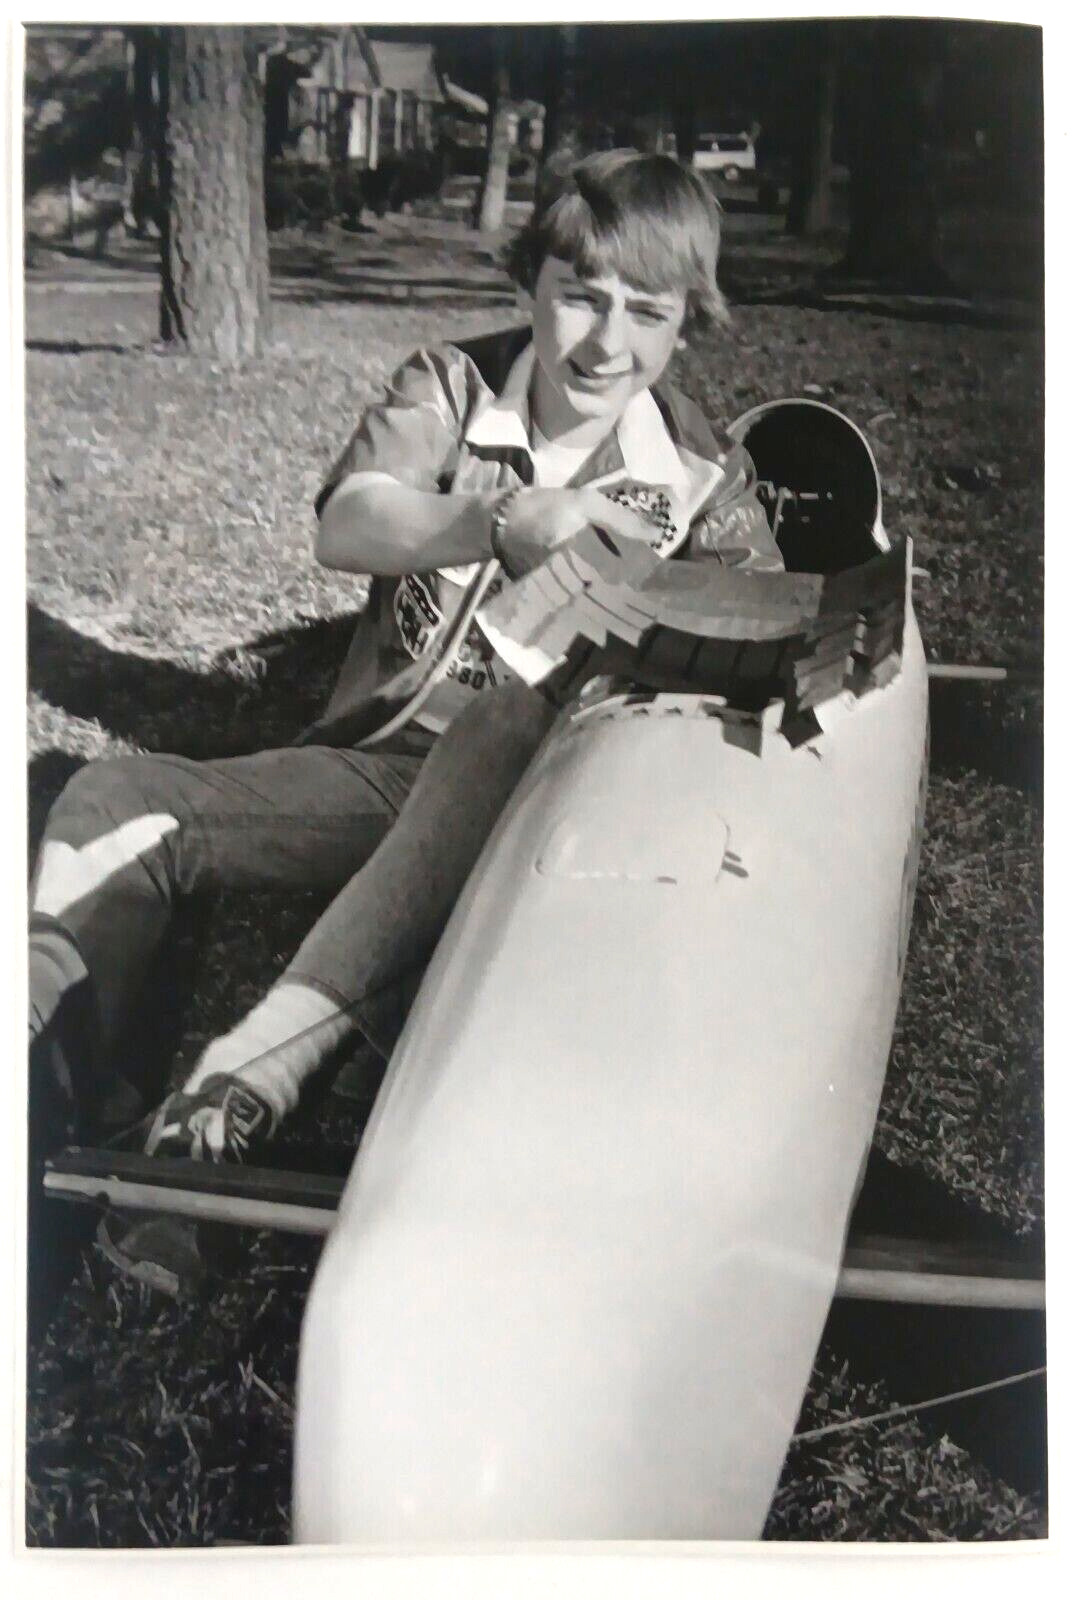 1981 Charlotte NC Soap Box Derby Race Racer Working on Cart Vintage Press Photo